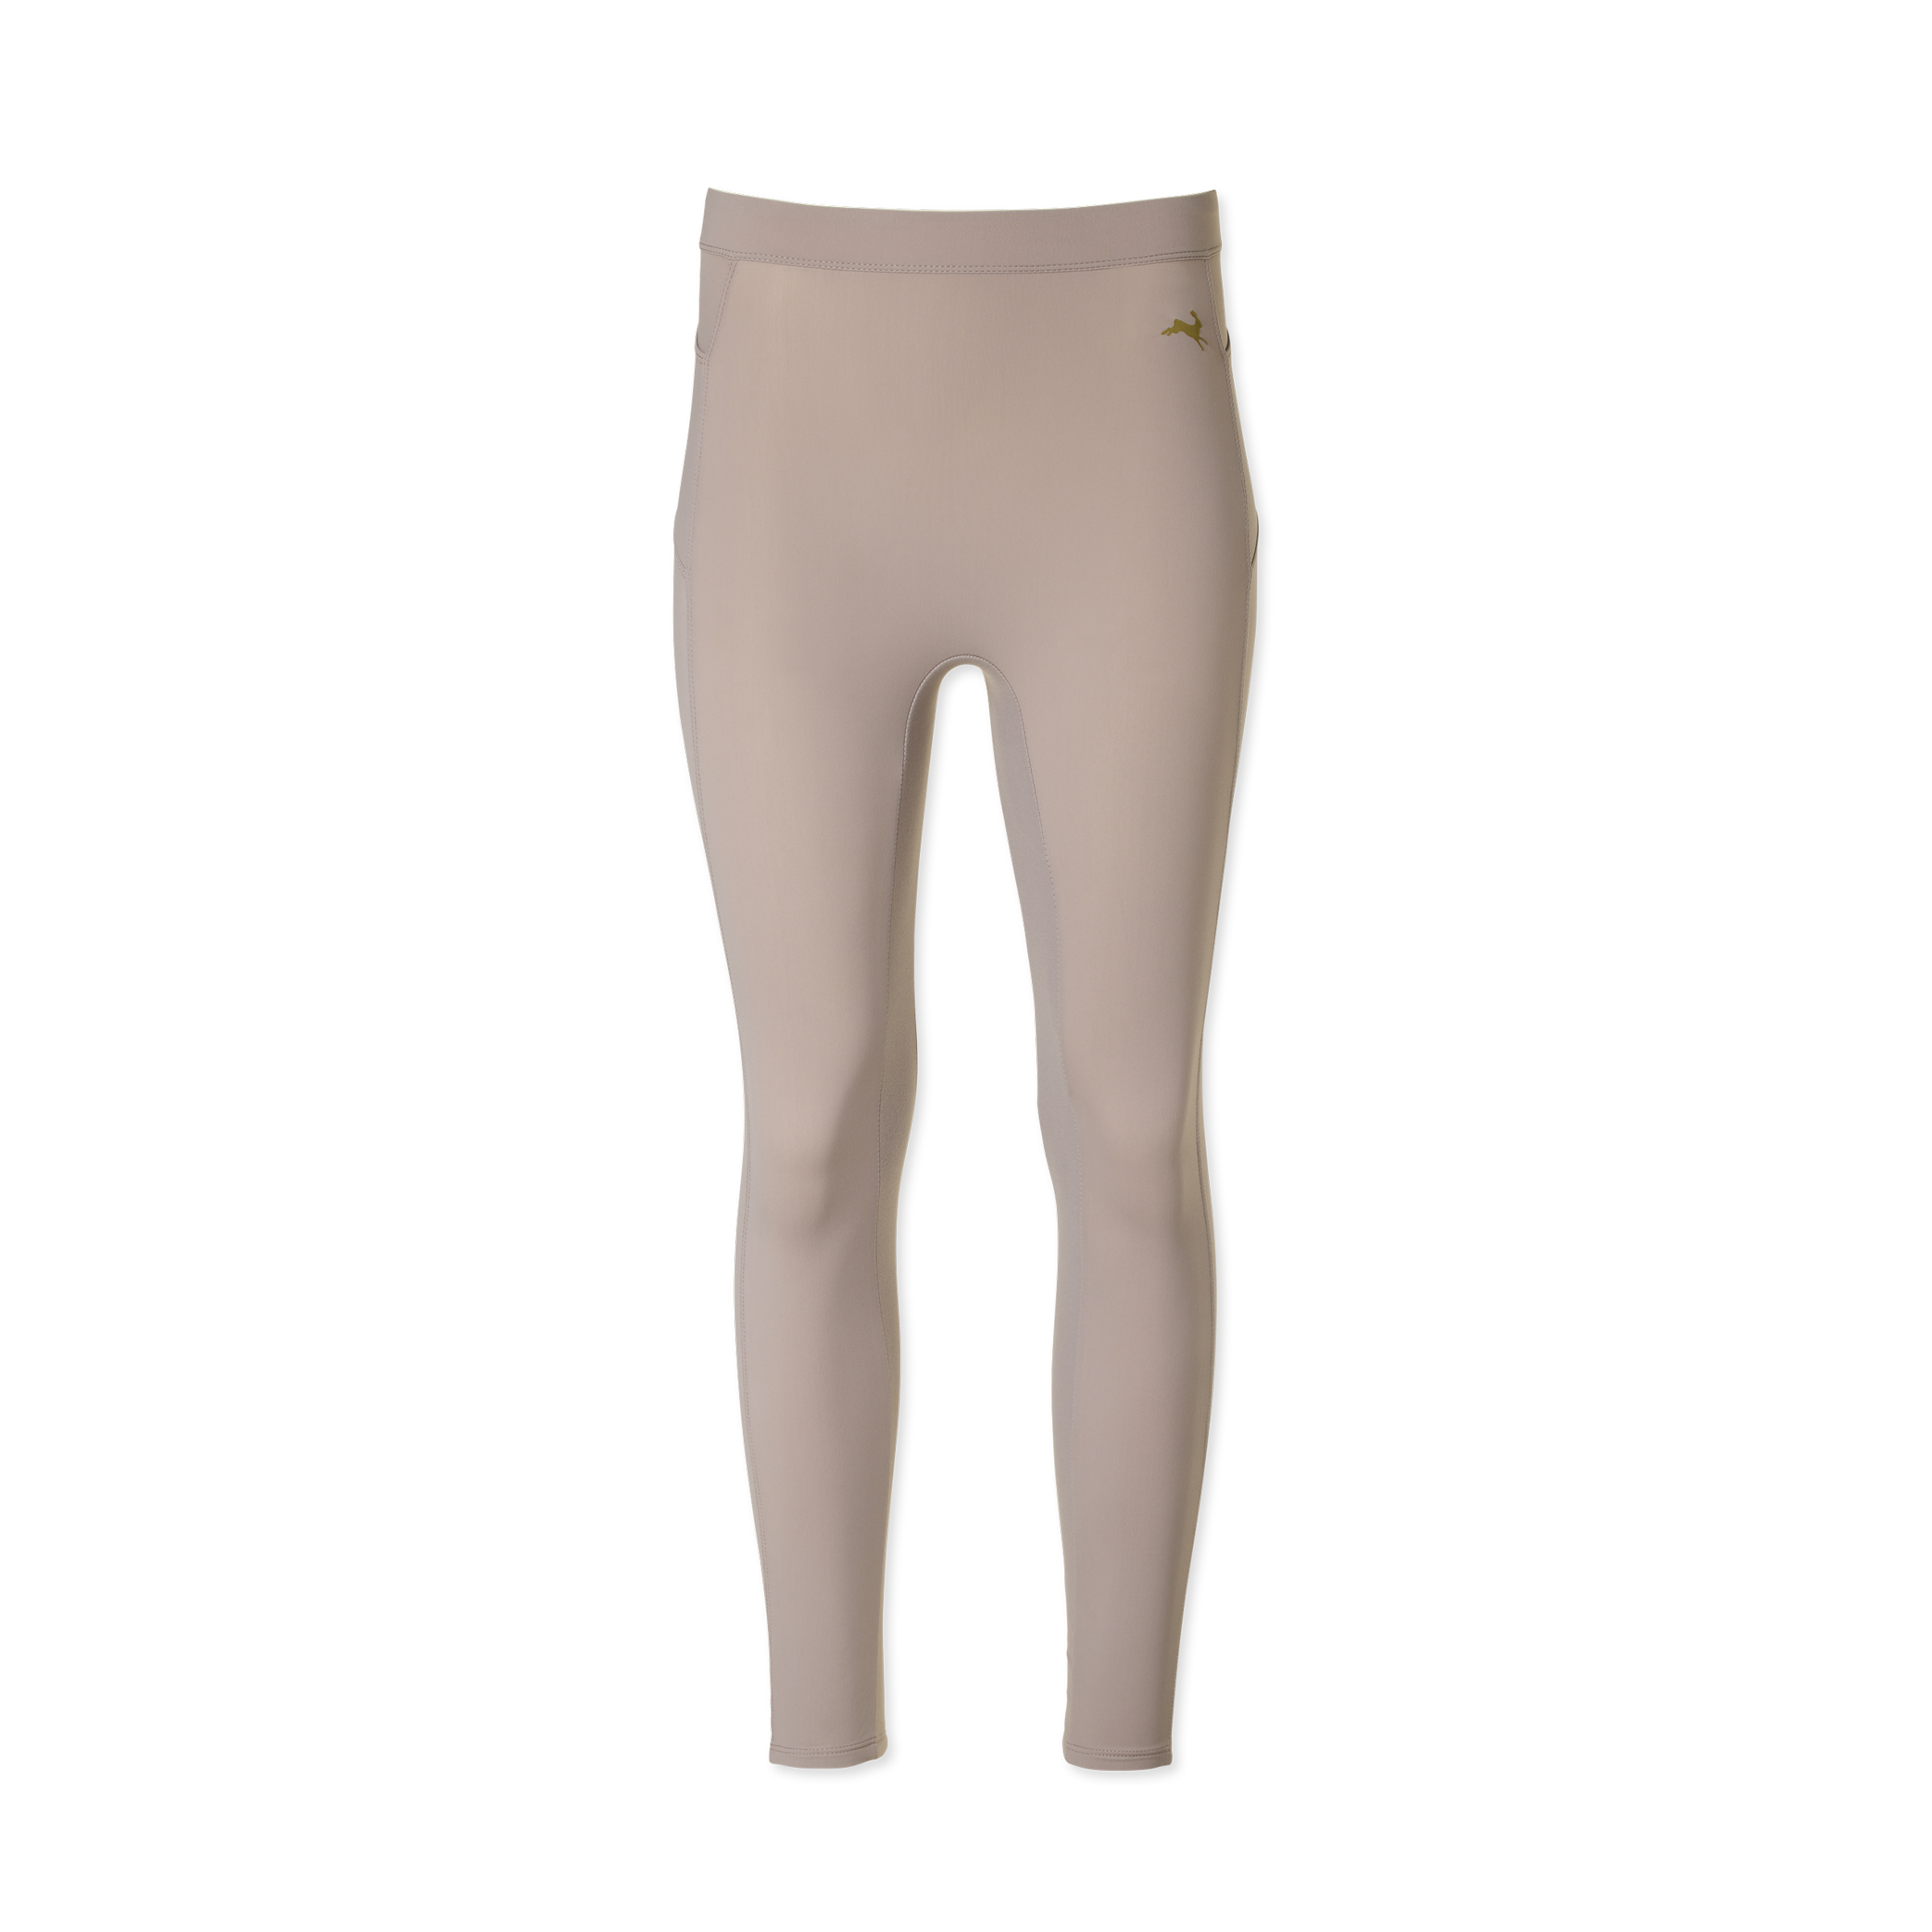 https://cdn.shopify.com/s/files/1/1594/4353/products/Spring23-Womens-Turnover-Crop-Tight-Women-Gull-On-Model.png?v=1681165712?q=50&auto=format&dpr=1&w=800&h=450&fit=crop